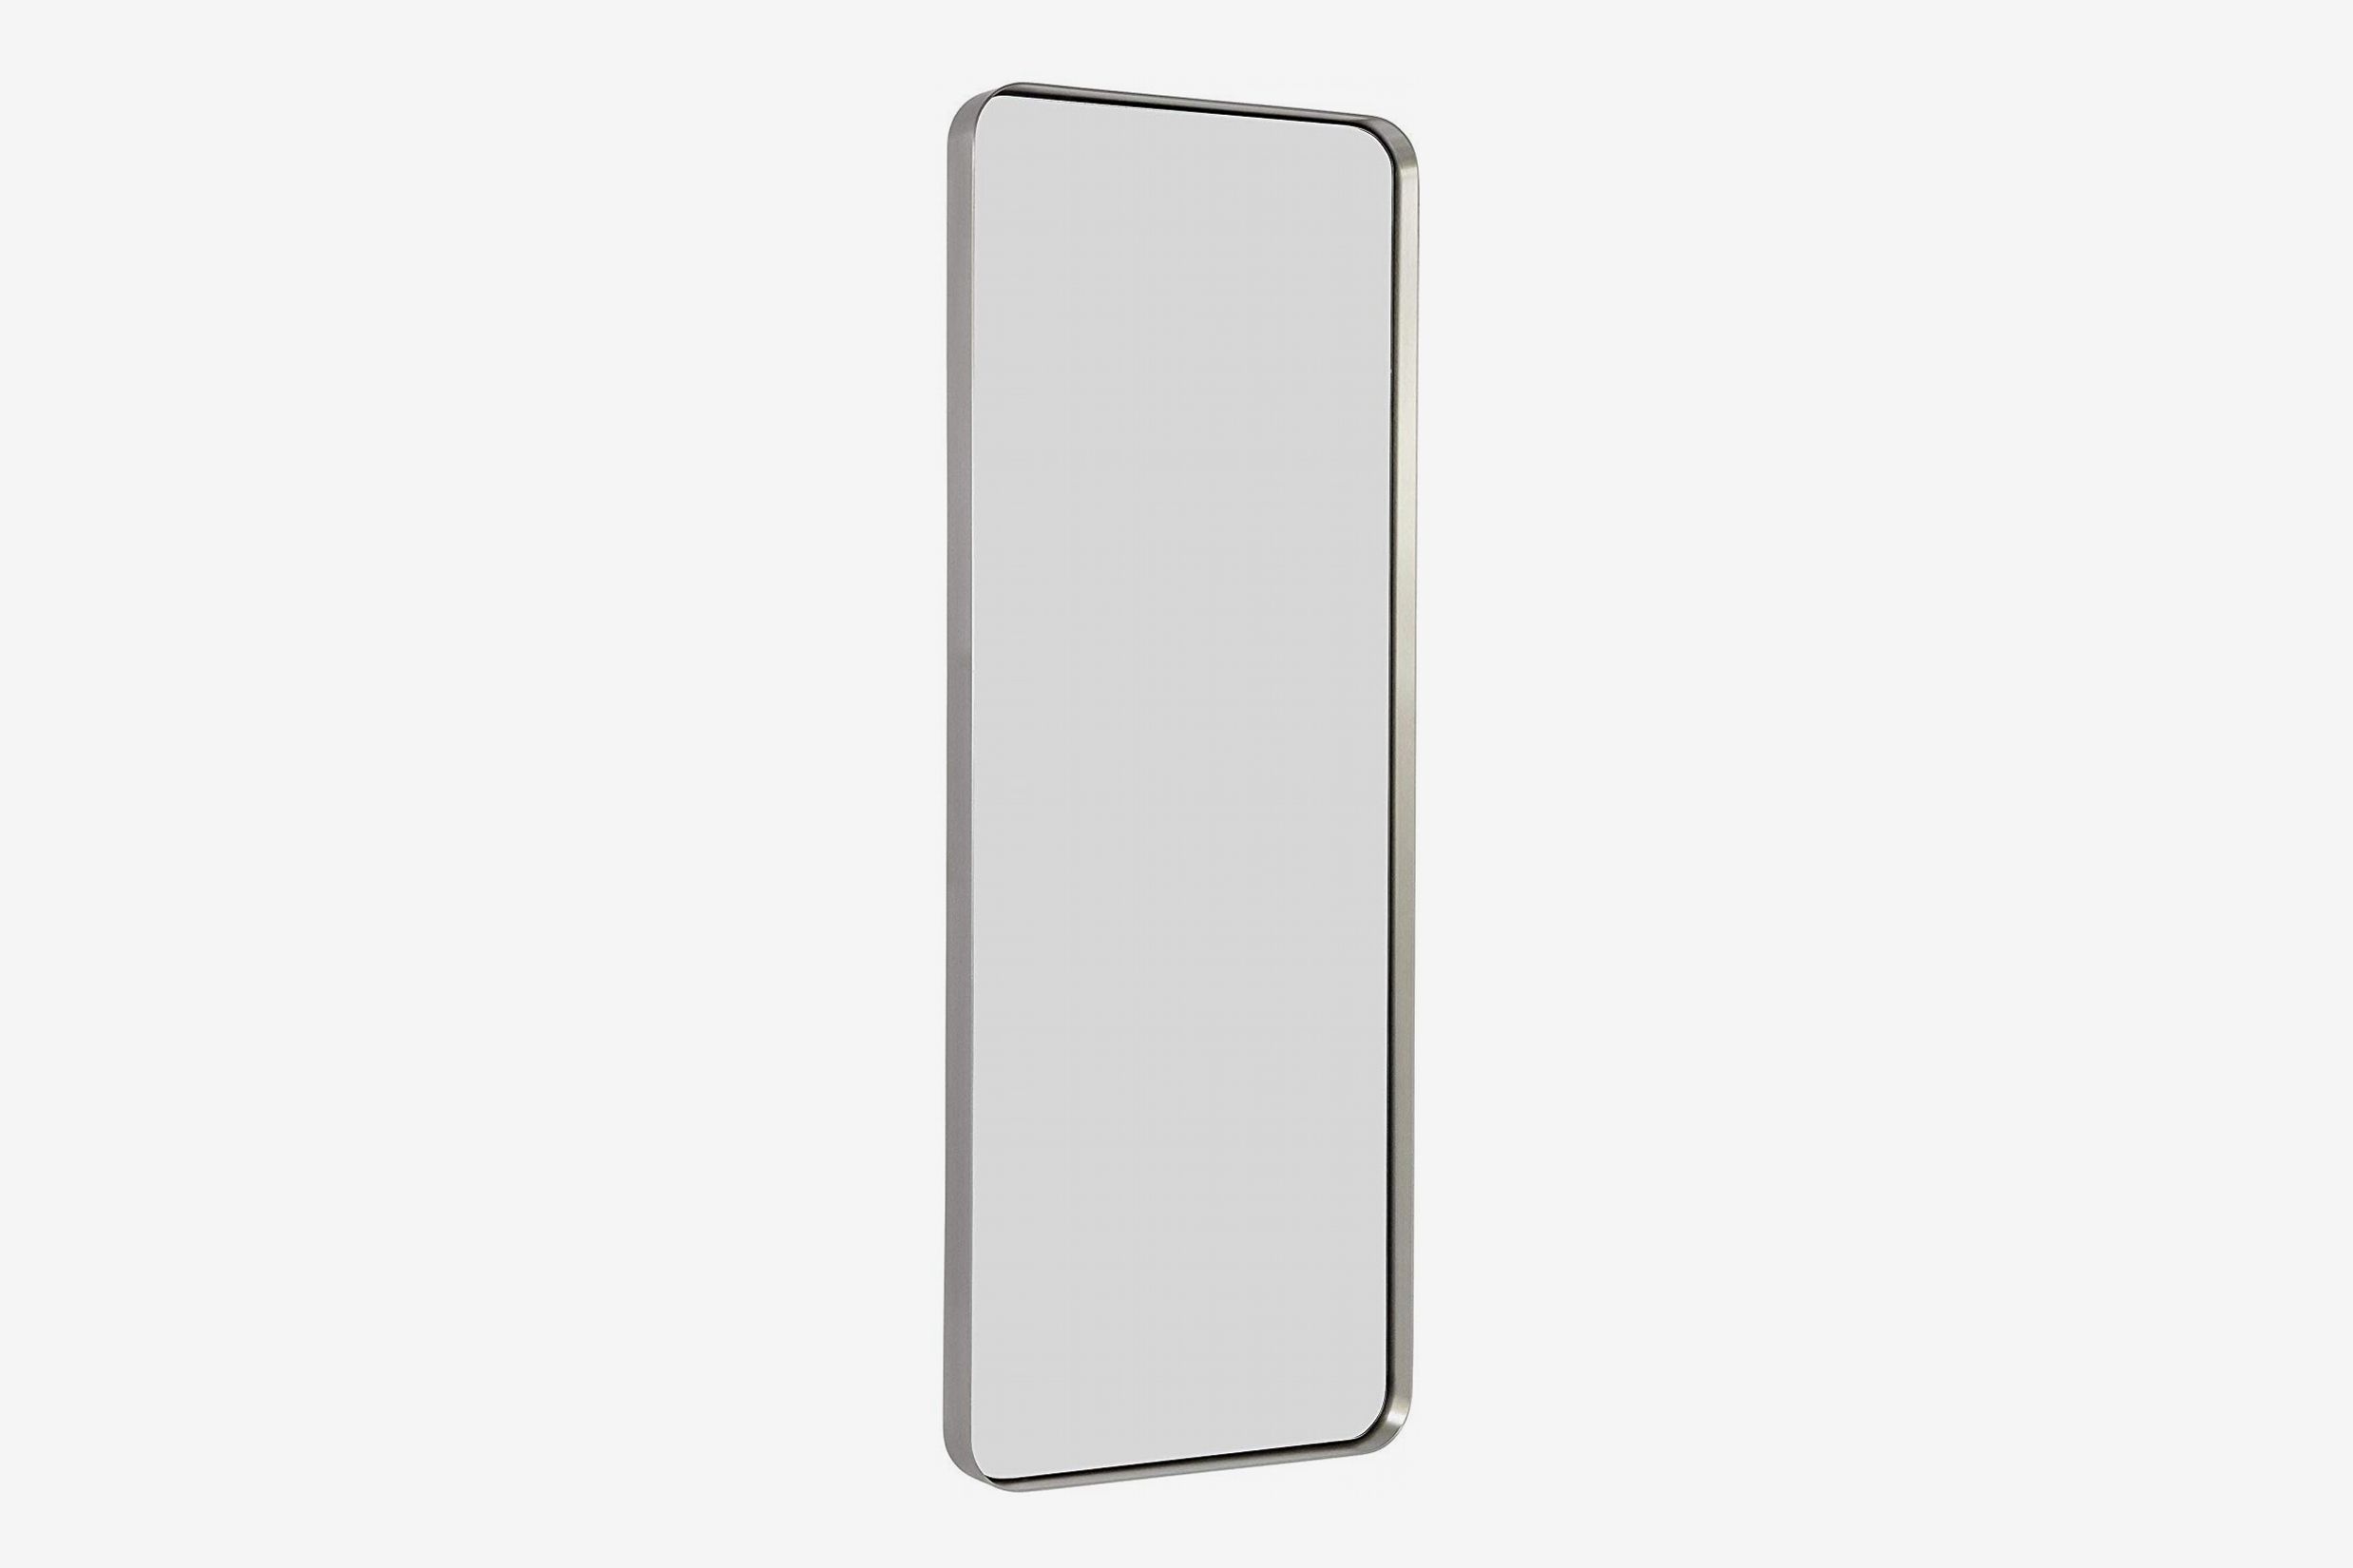 8 Best Full Length Mirrors To 2019, How To Mount Full Length Mirror On Wall